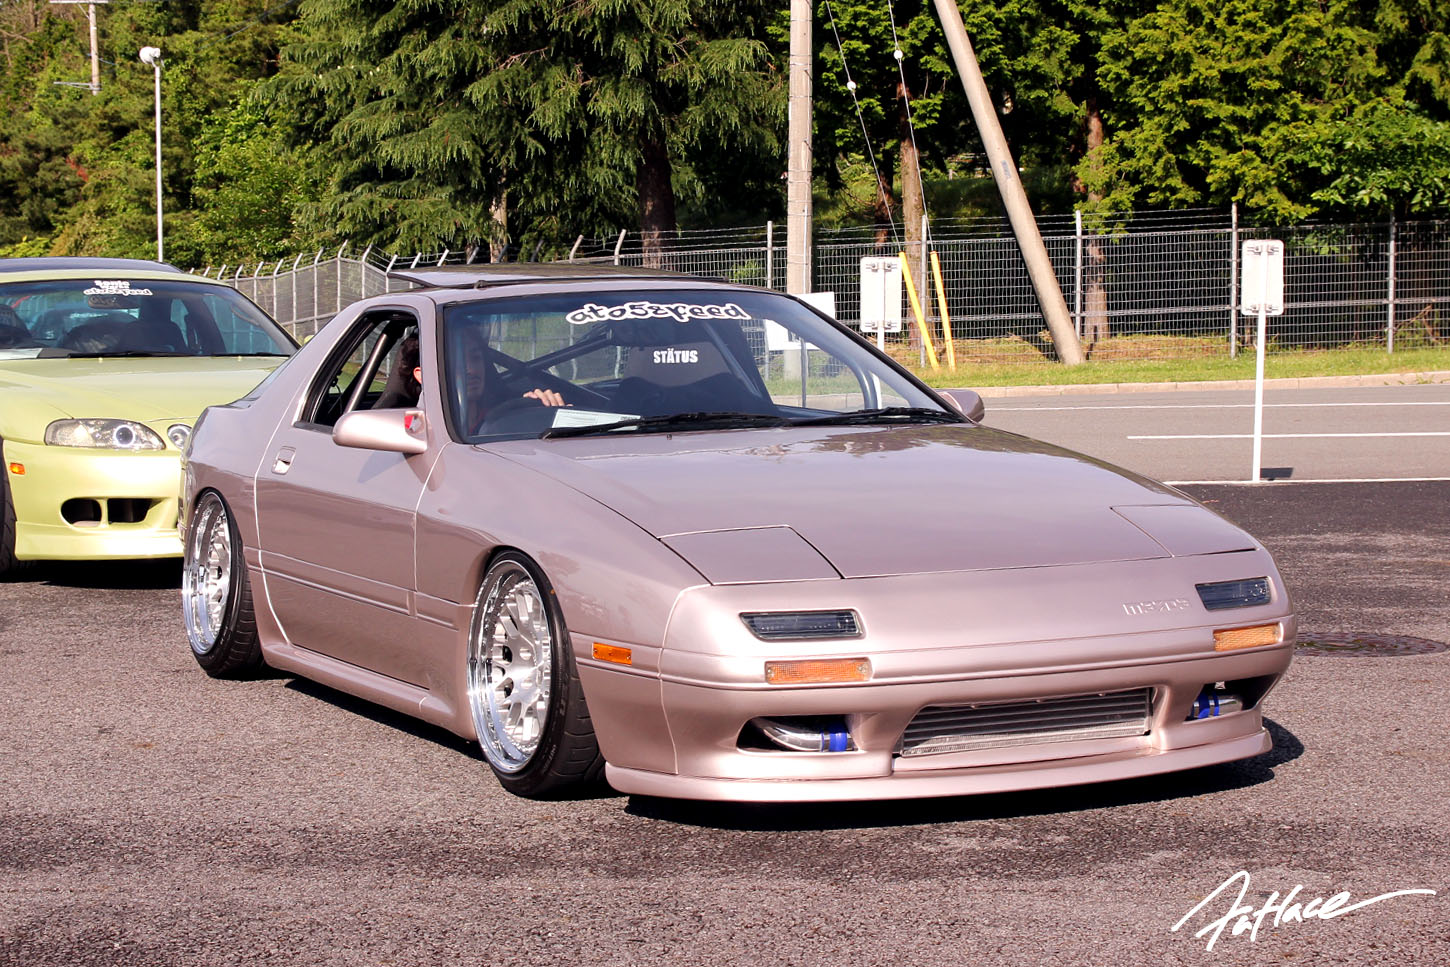 This defines a perfect, clean RX-7 FC. 